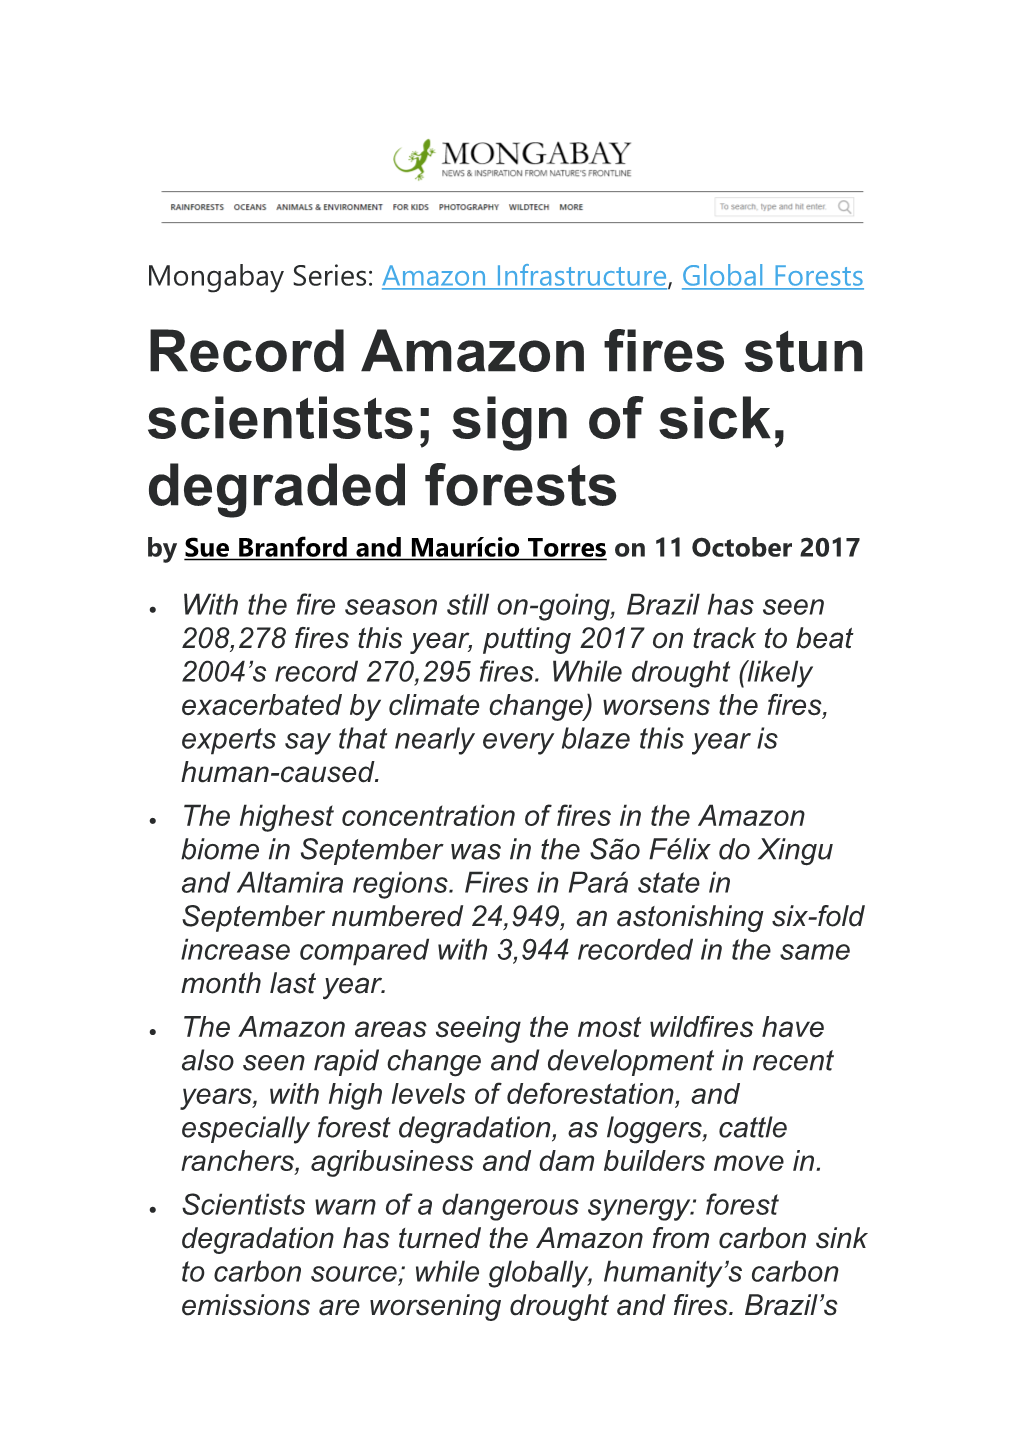 Record Amazon Fires Stun Scientists; Sign of Sick, Degraded Forests by Sue Branford and Maurício Torres on 11 October 2017